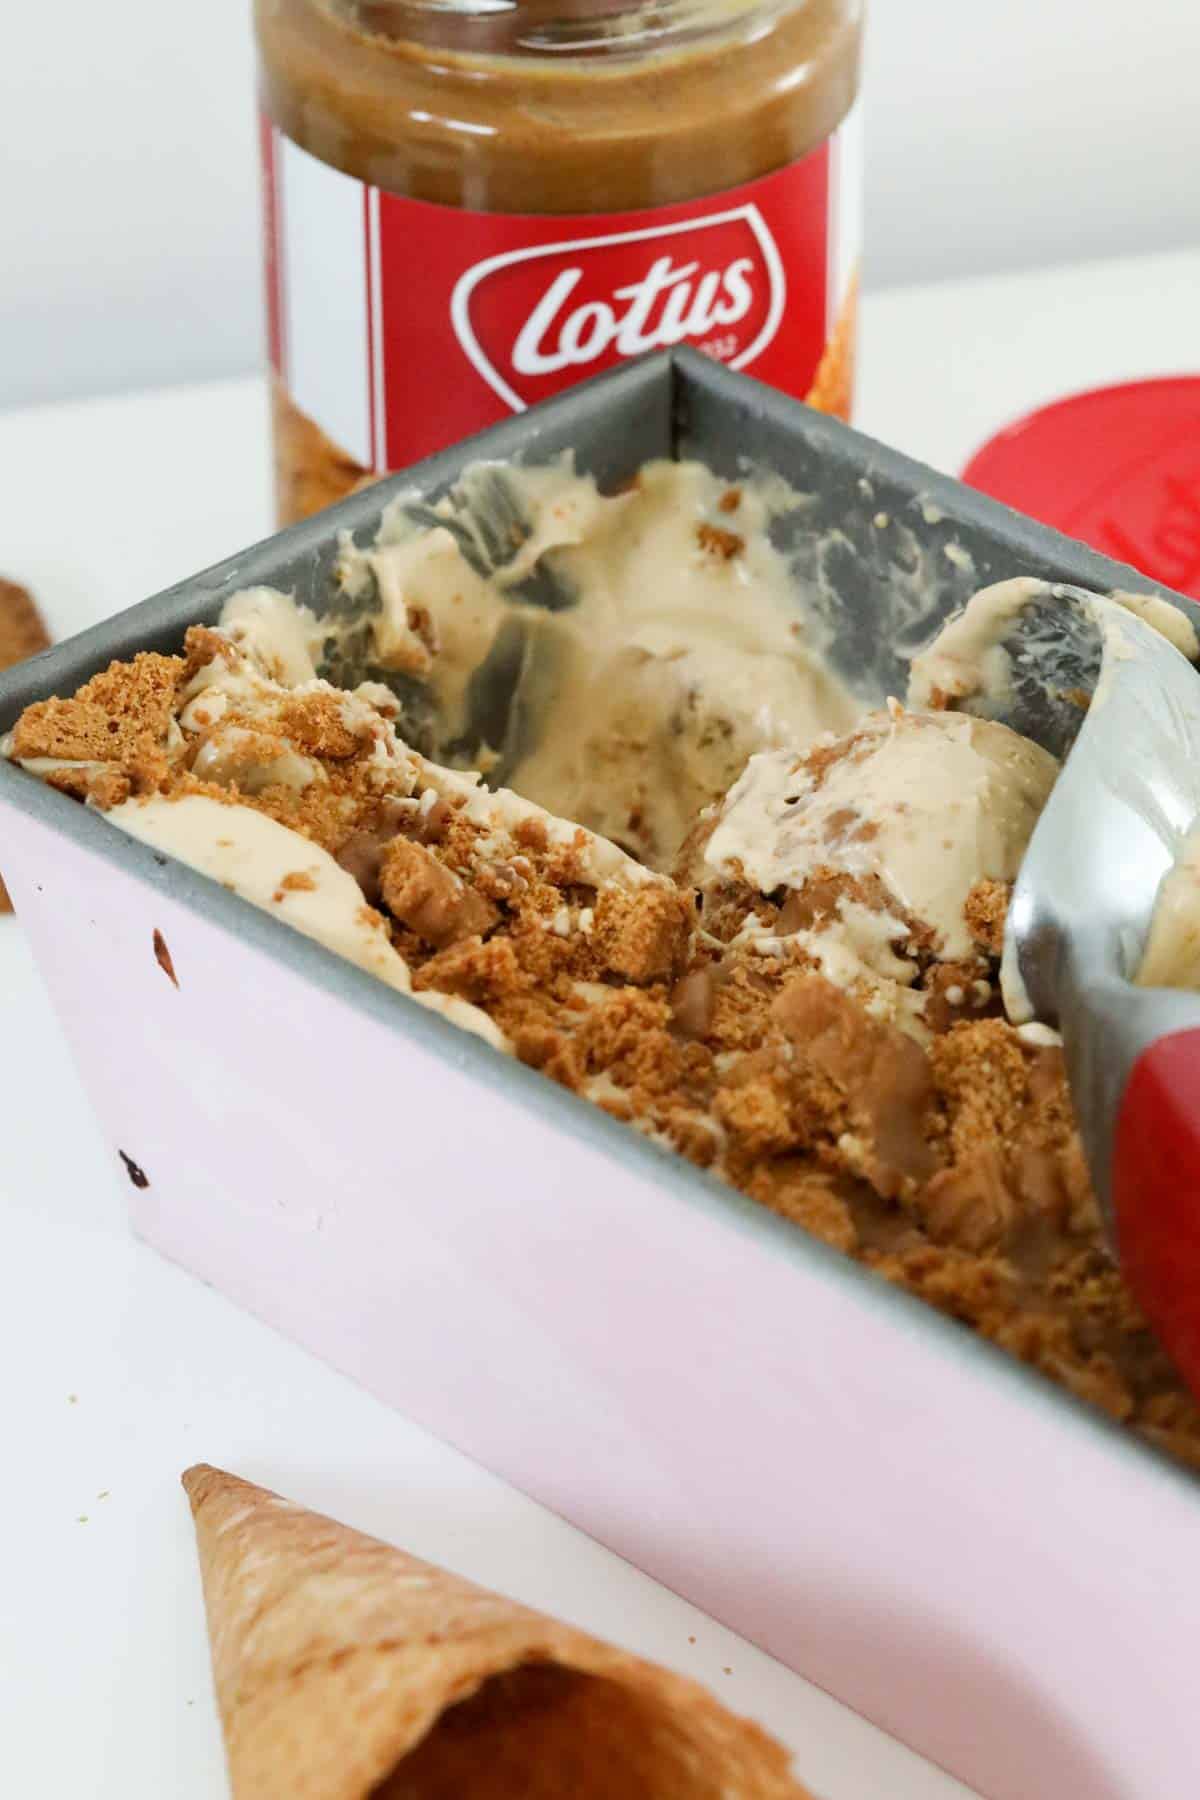 An ice cream scoop rolling a ball of ice cream in a tray of crunchy Biscoff ice cream.